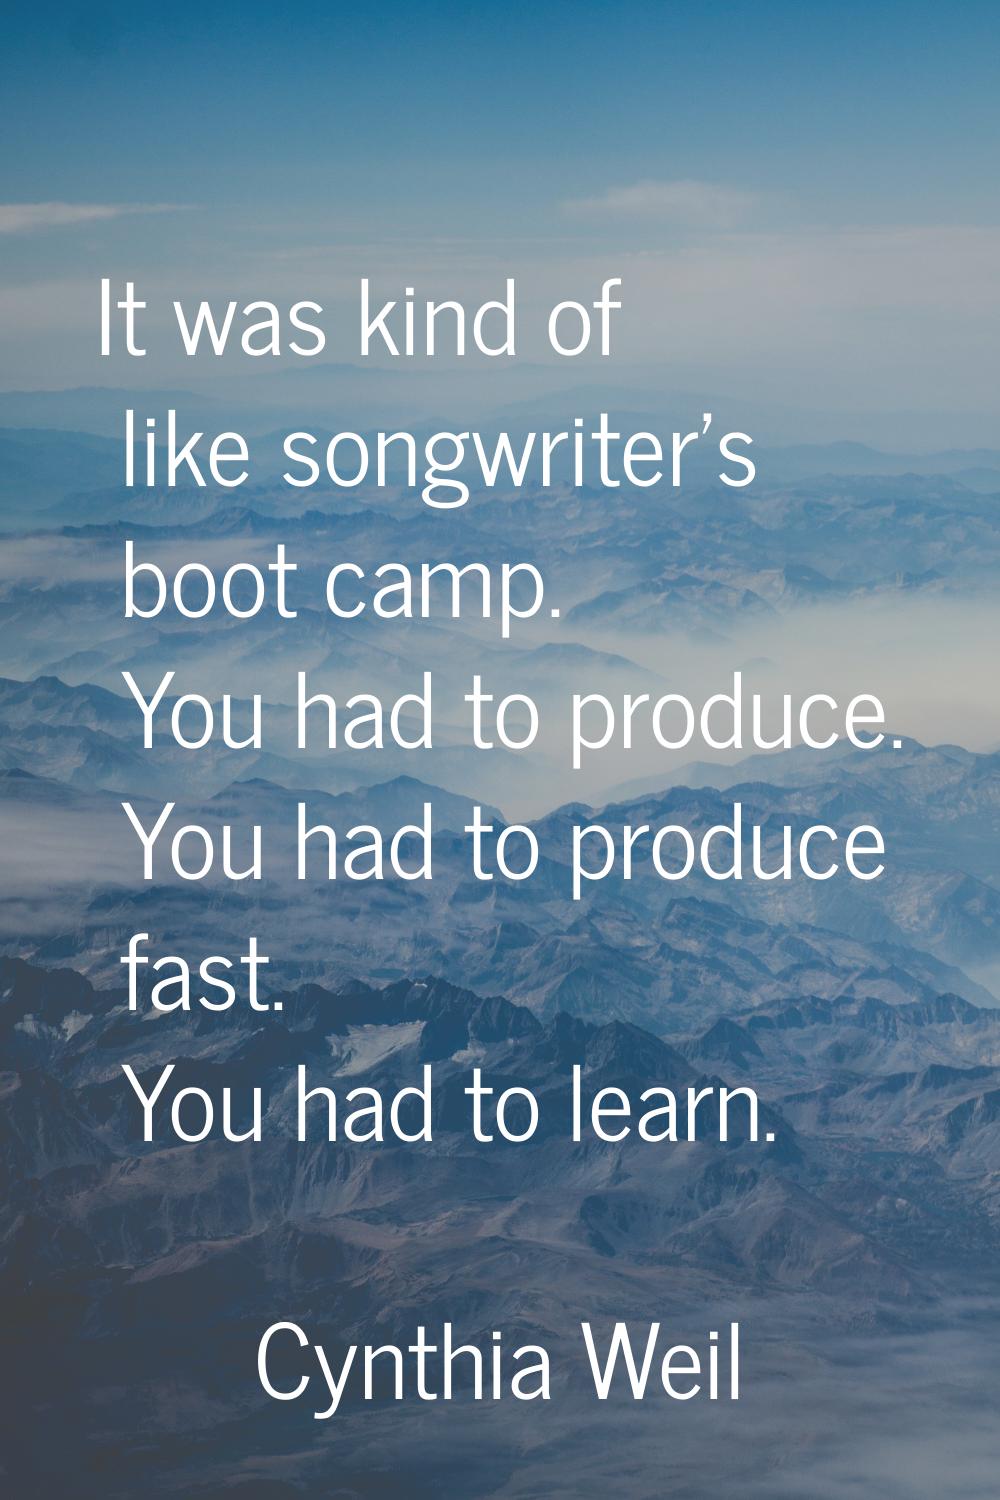 It was kind of like songwriter's boot camp. You had to produce. You had to produce fast. You had to